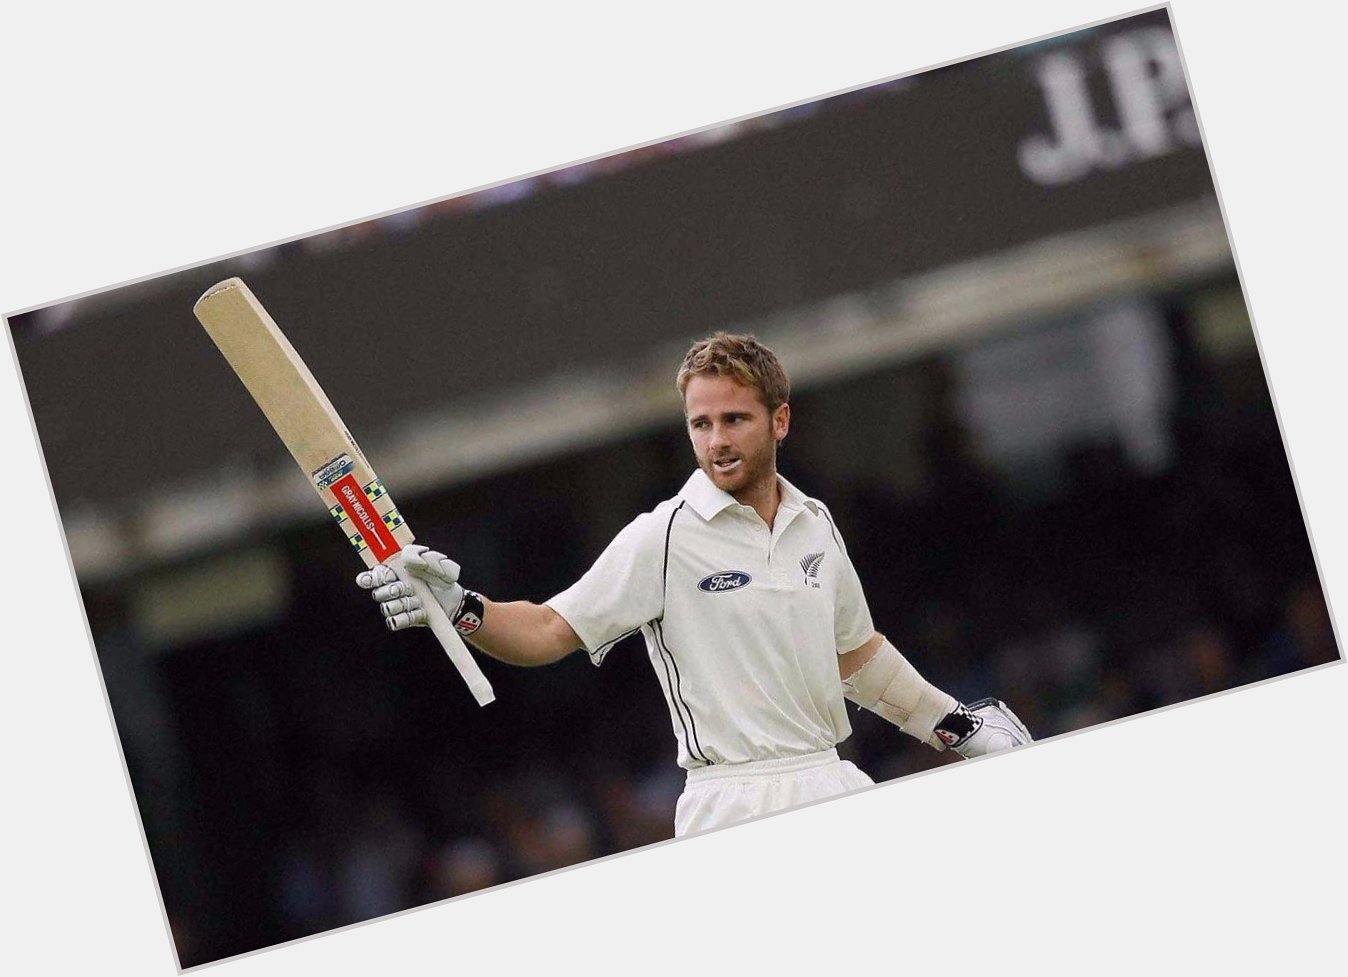 Happy 28th  Birthday Kane Williamson! 

Whats your favourite Kane Williamson moment?

Ours is signing him 